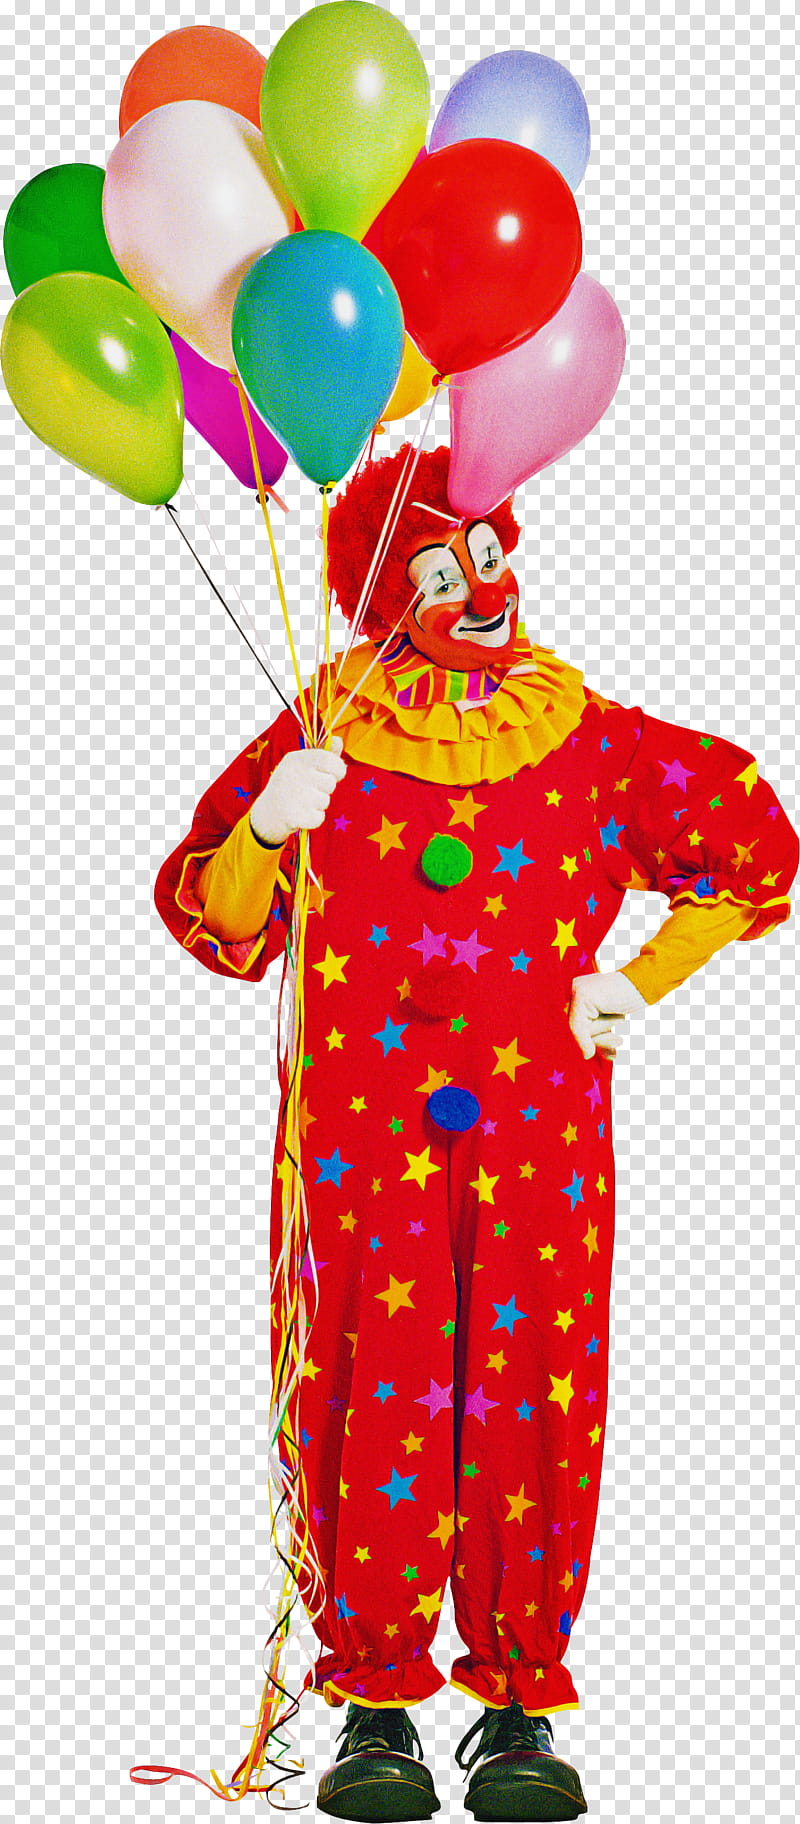 s, Clown, Wig, Party Supply, Balloon, Jester, Performing Arts, Costume transparent background PNG clipart